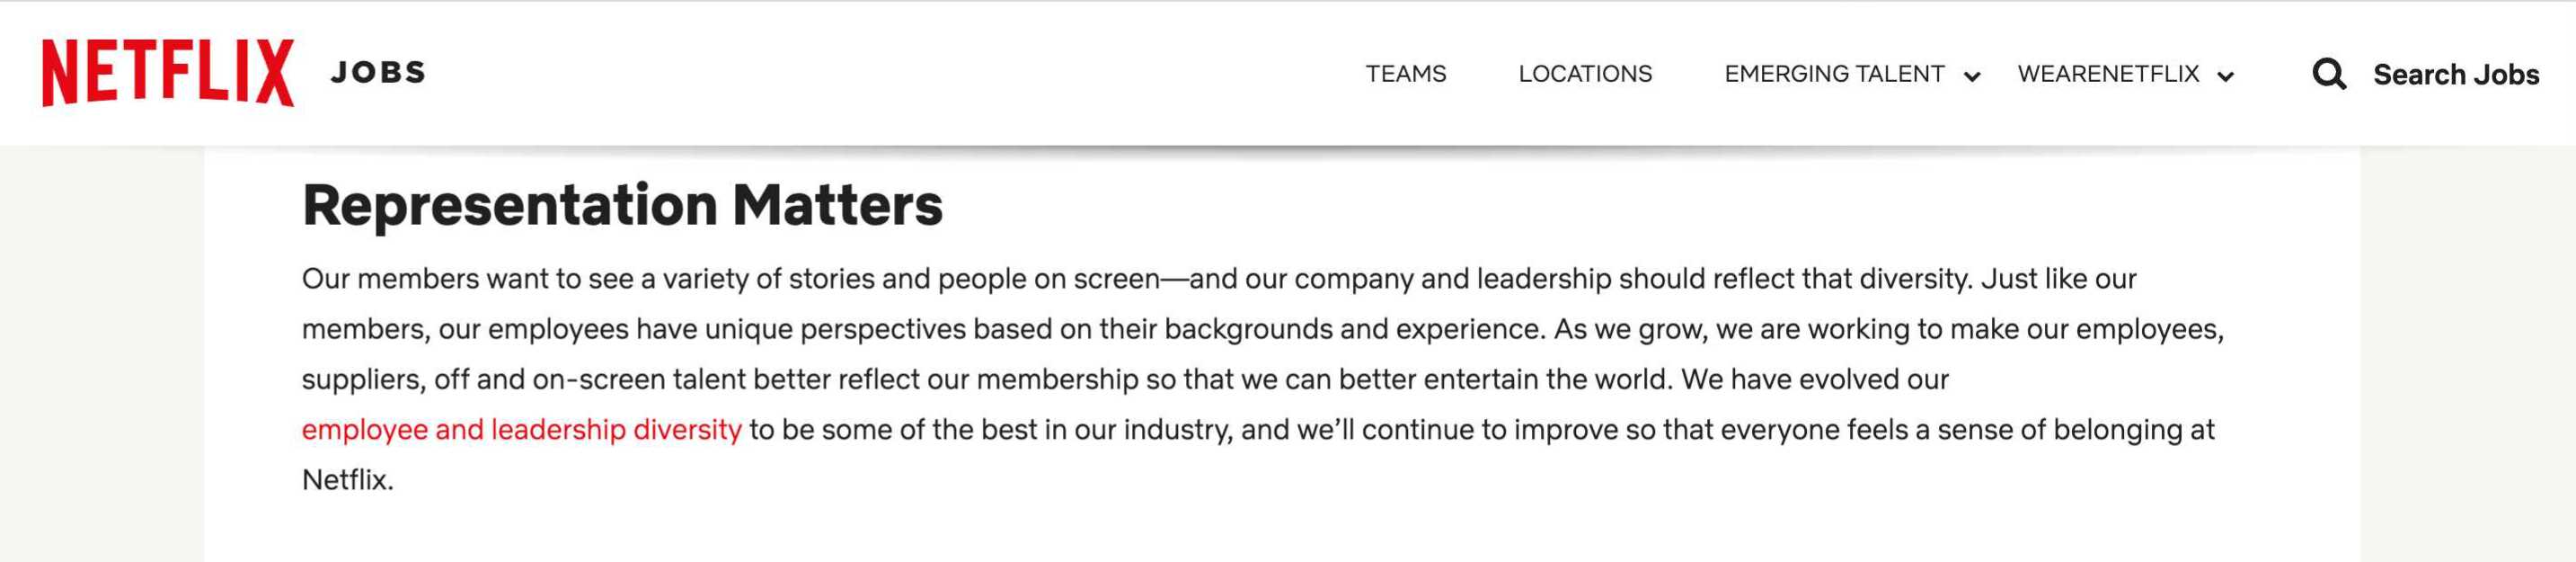 An example of representation from Netflix's company culture page